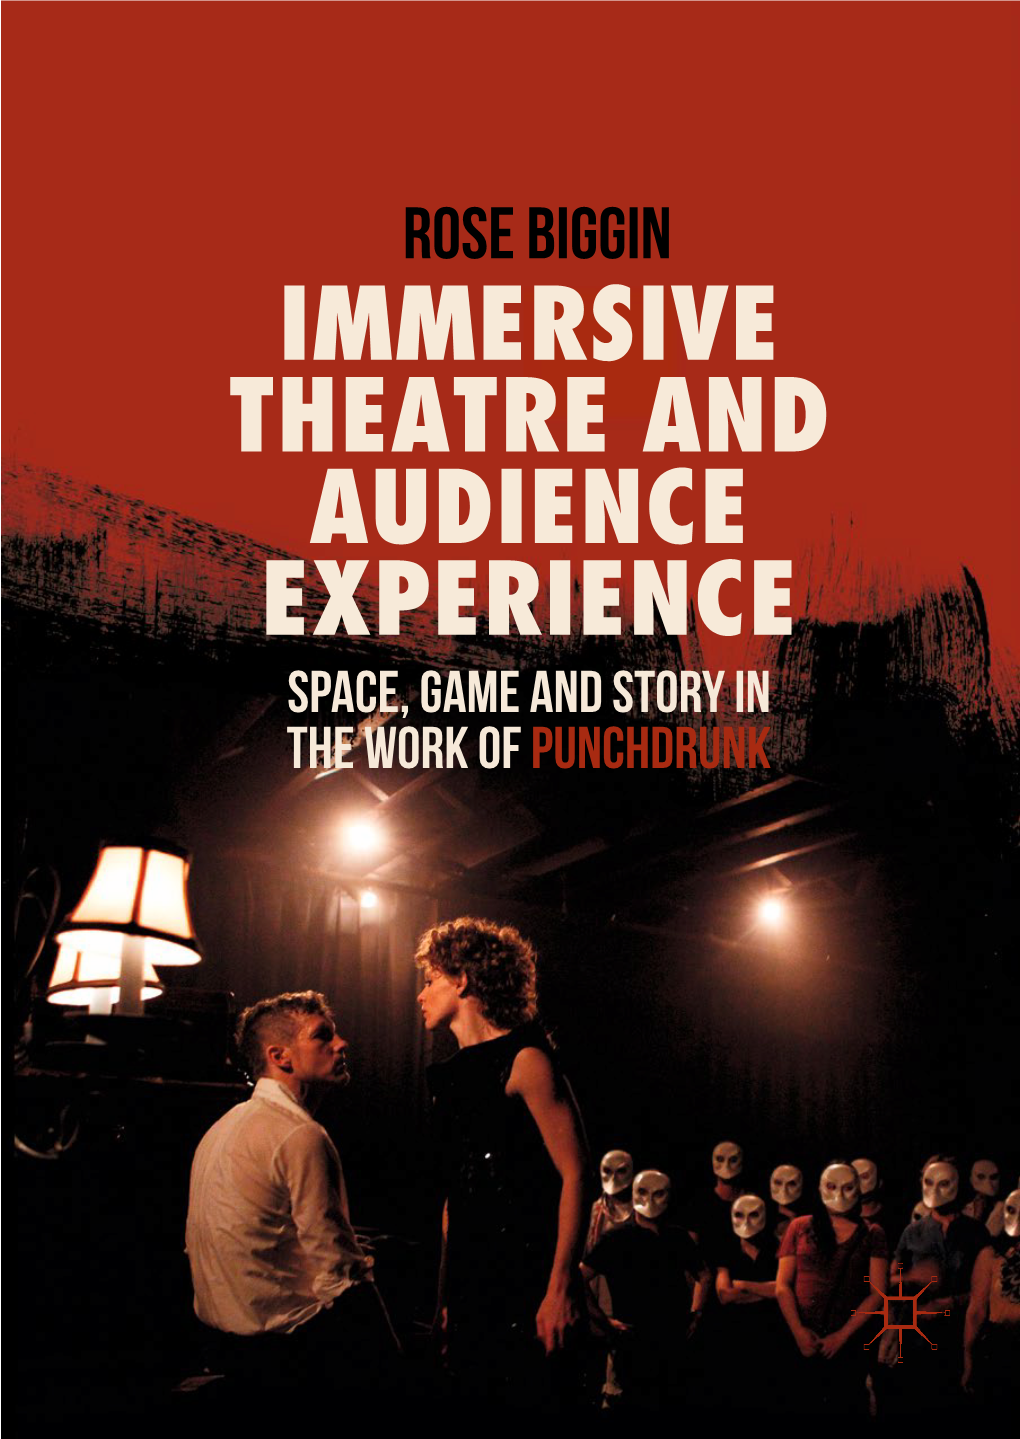 IMMERSIVE THEATRE and AUDIENCE EXPERIENCE Space, Game and Story in the Work of Punchdrunk Rose Biggin Immersive Theatre and Audience Experience